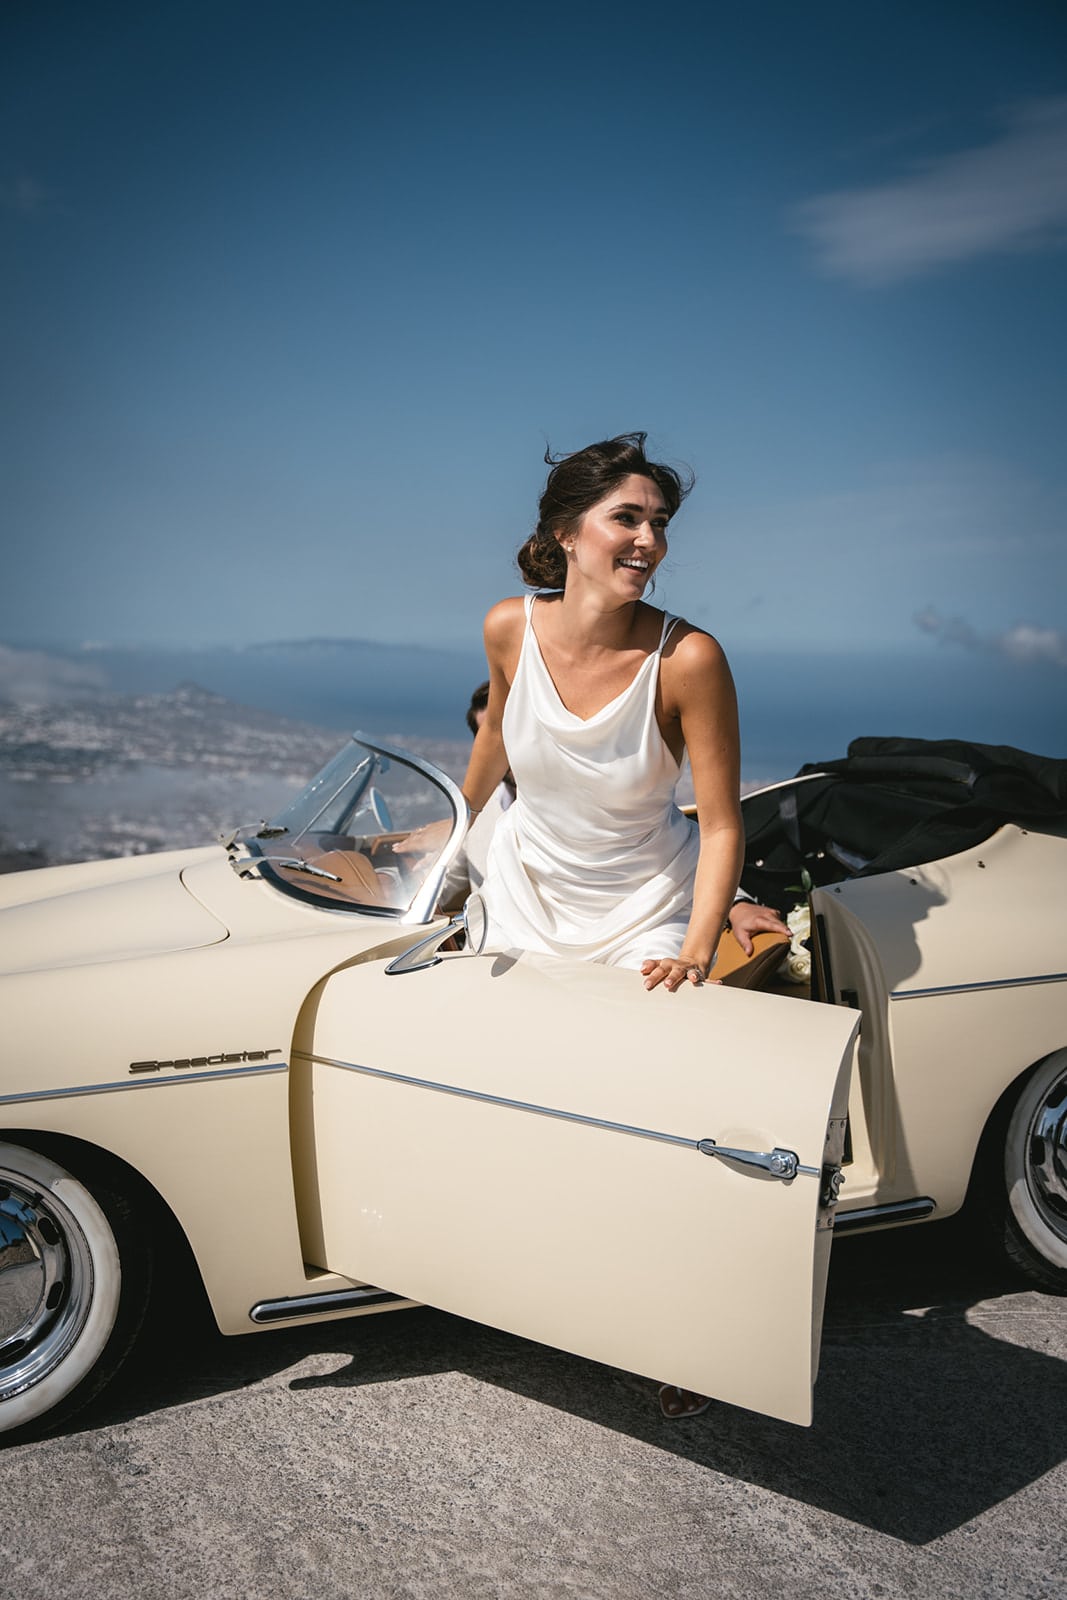 Elopement dreams elevate, with the couple and their vintage car framed by the sky